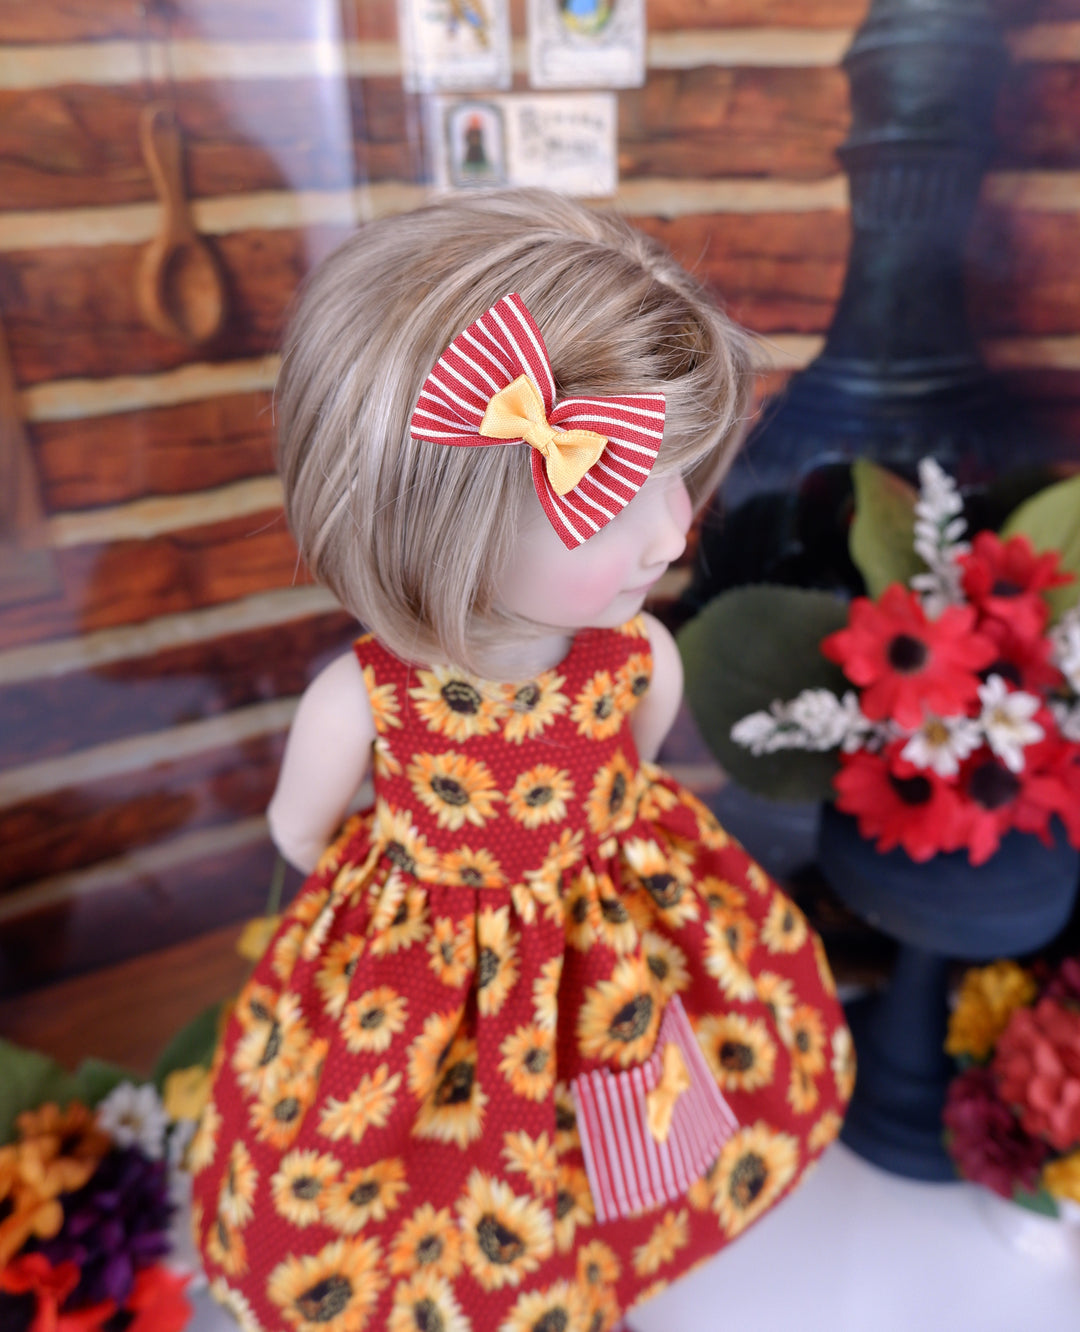 Sunflower Field - dress with shoes for Ruby Red Fashion Friends doll